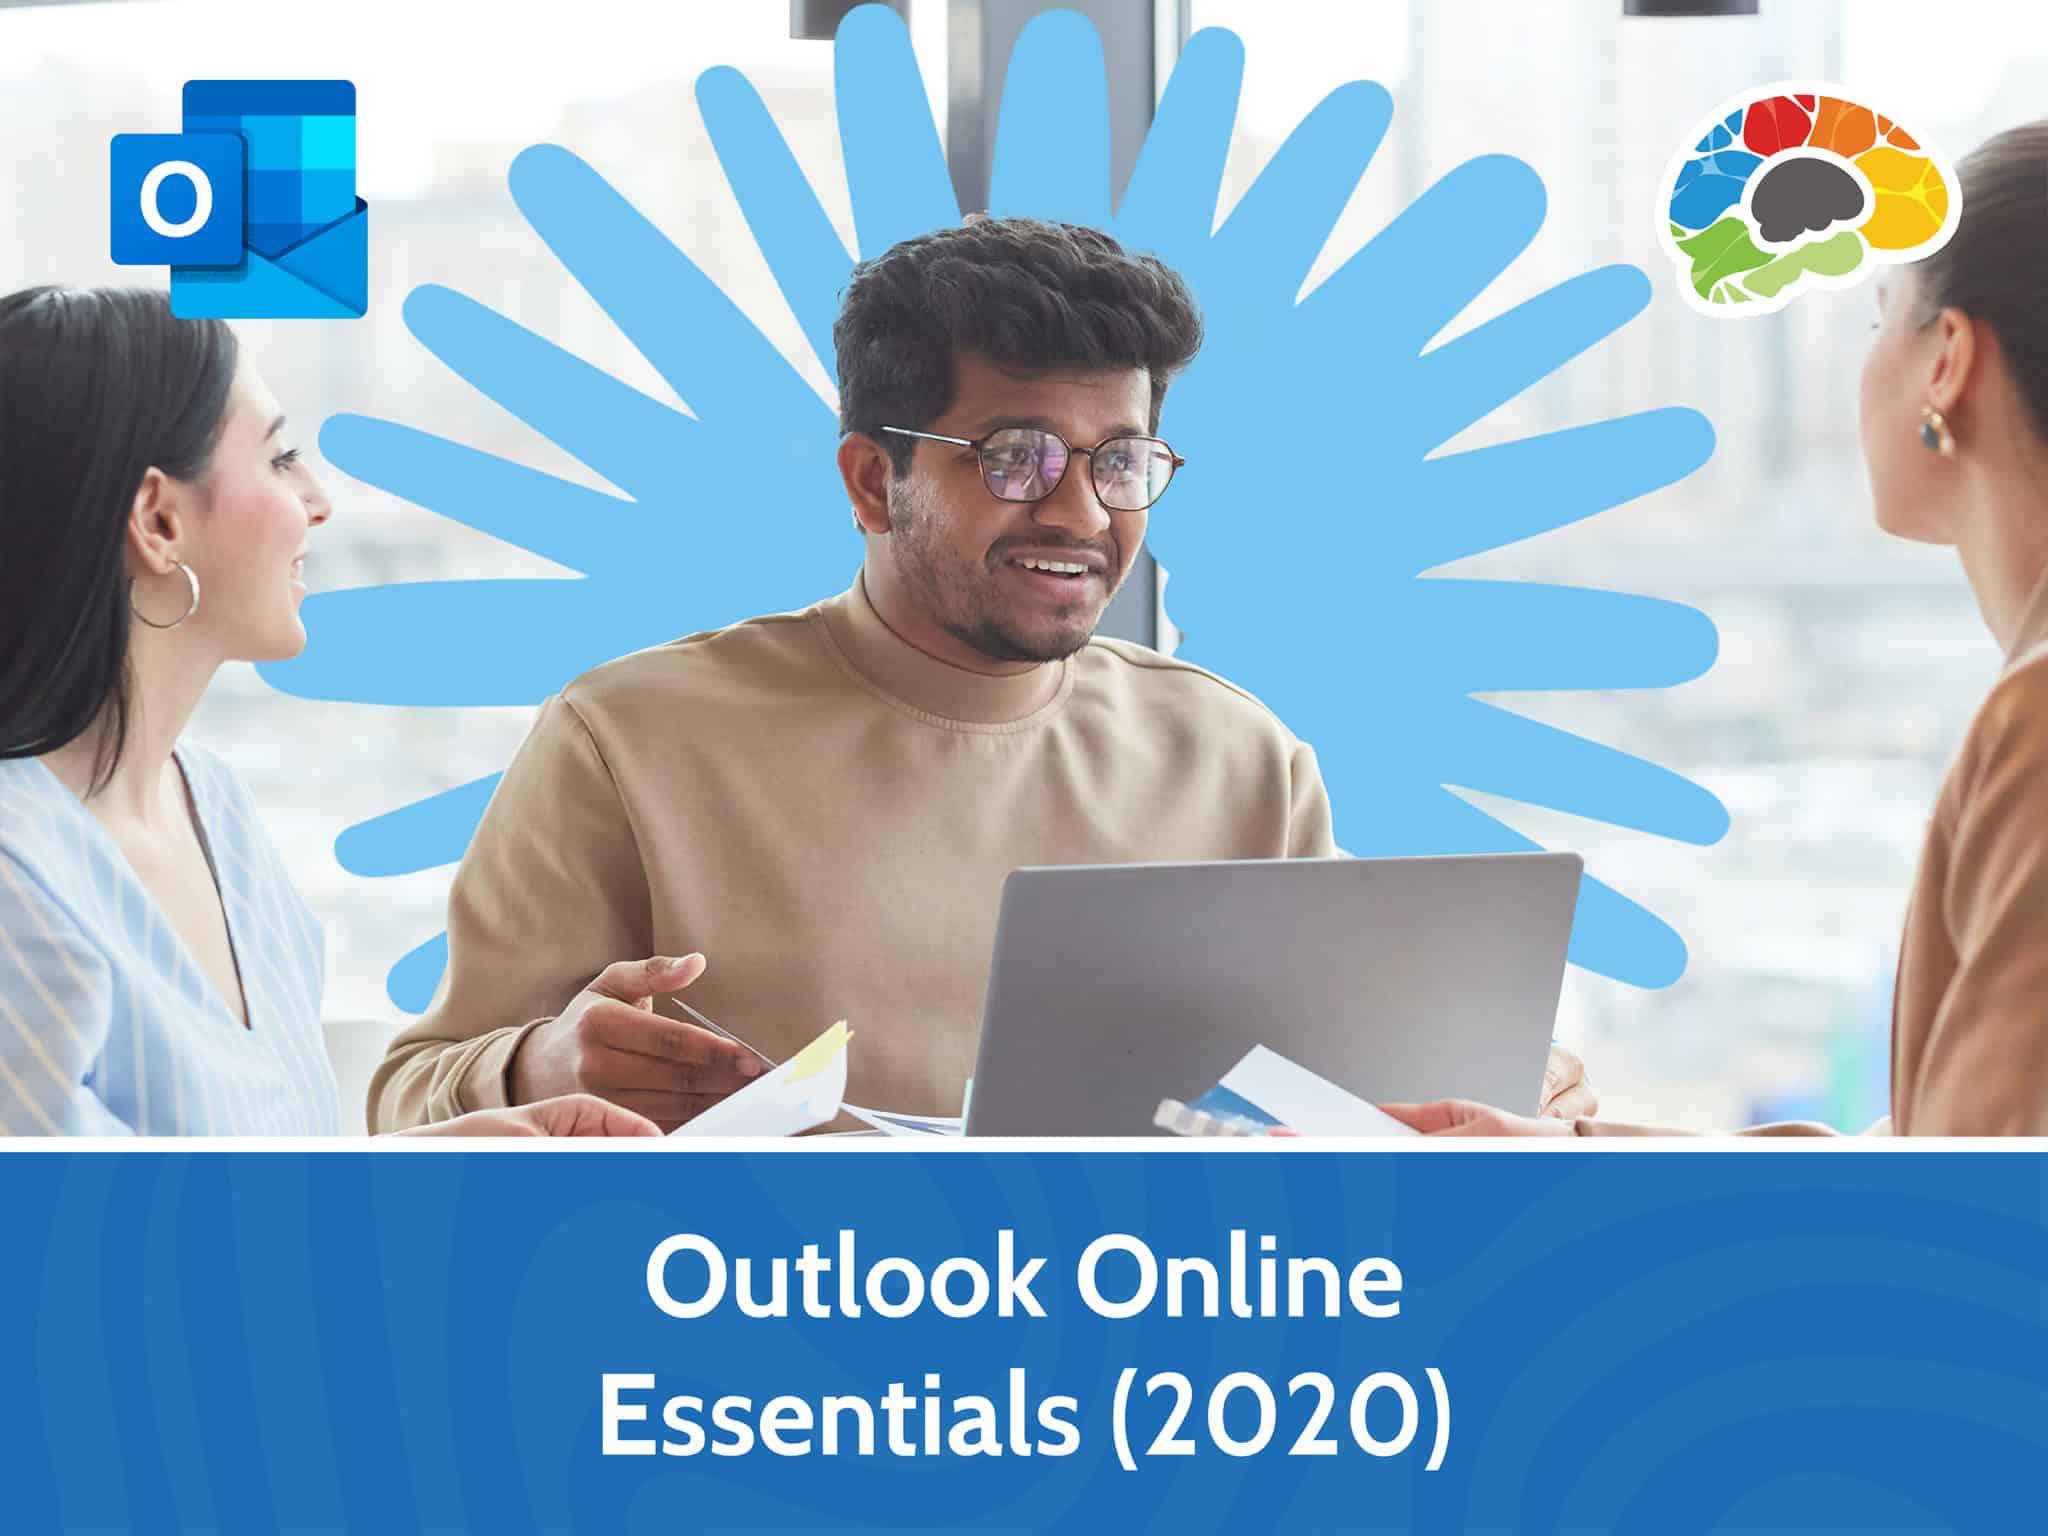 Outlook Online Essentials 2020 scaled